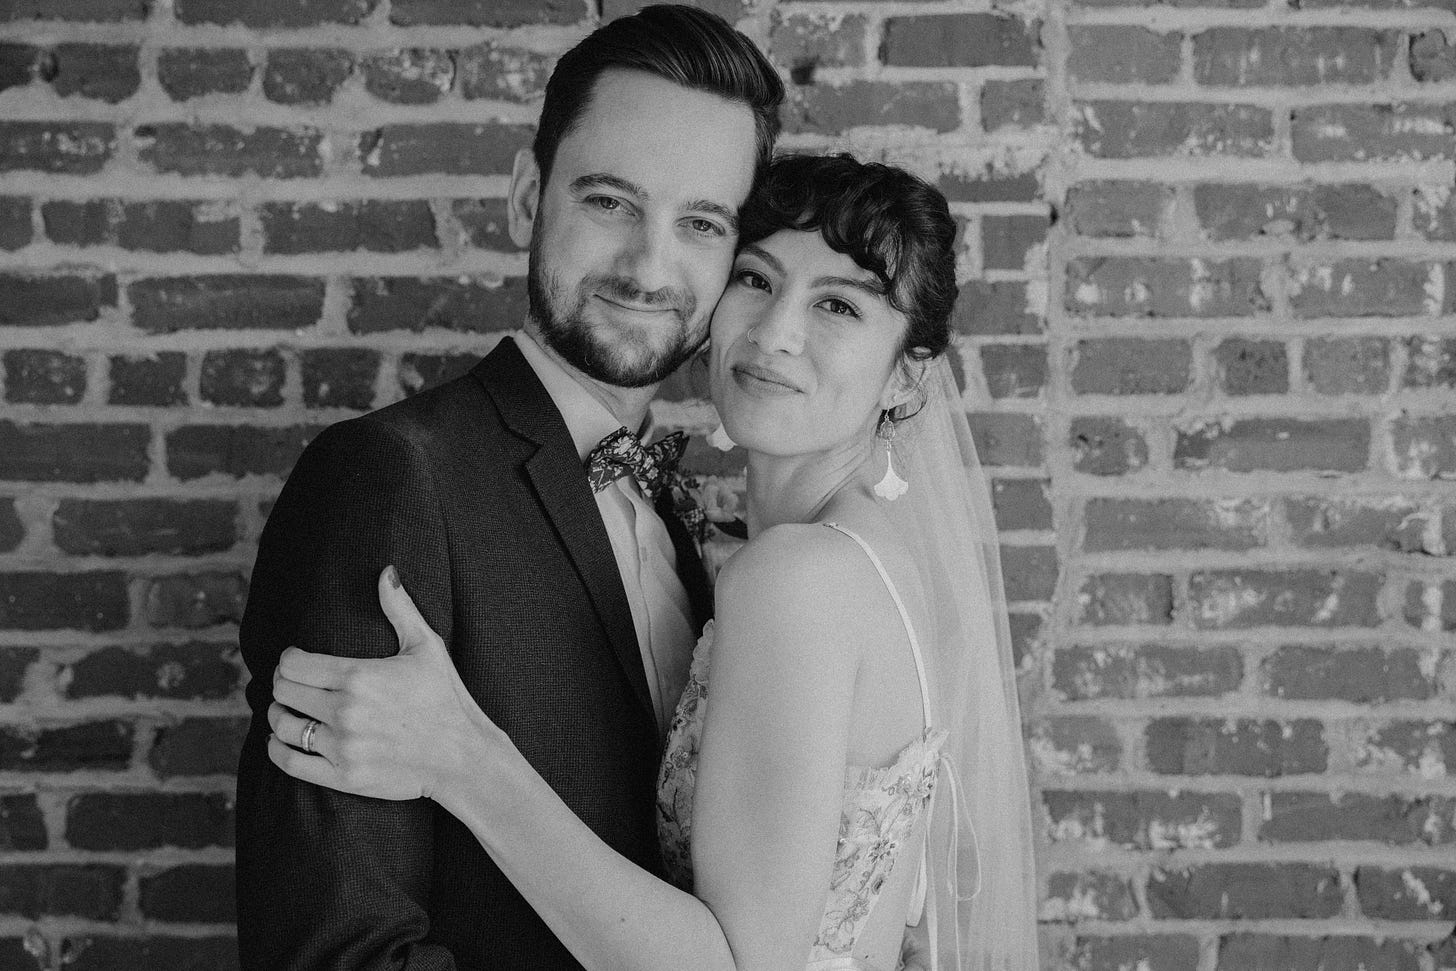 A wedding portrait of the author, Erika, with her husband, Aaron. Erika is embracing Aaron as they both look into the camera with soft smiles.